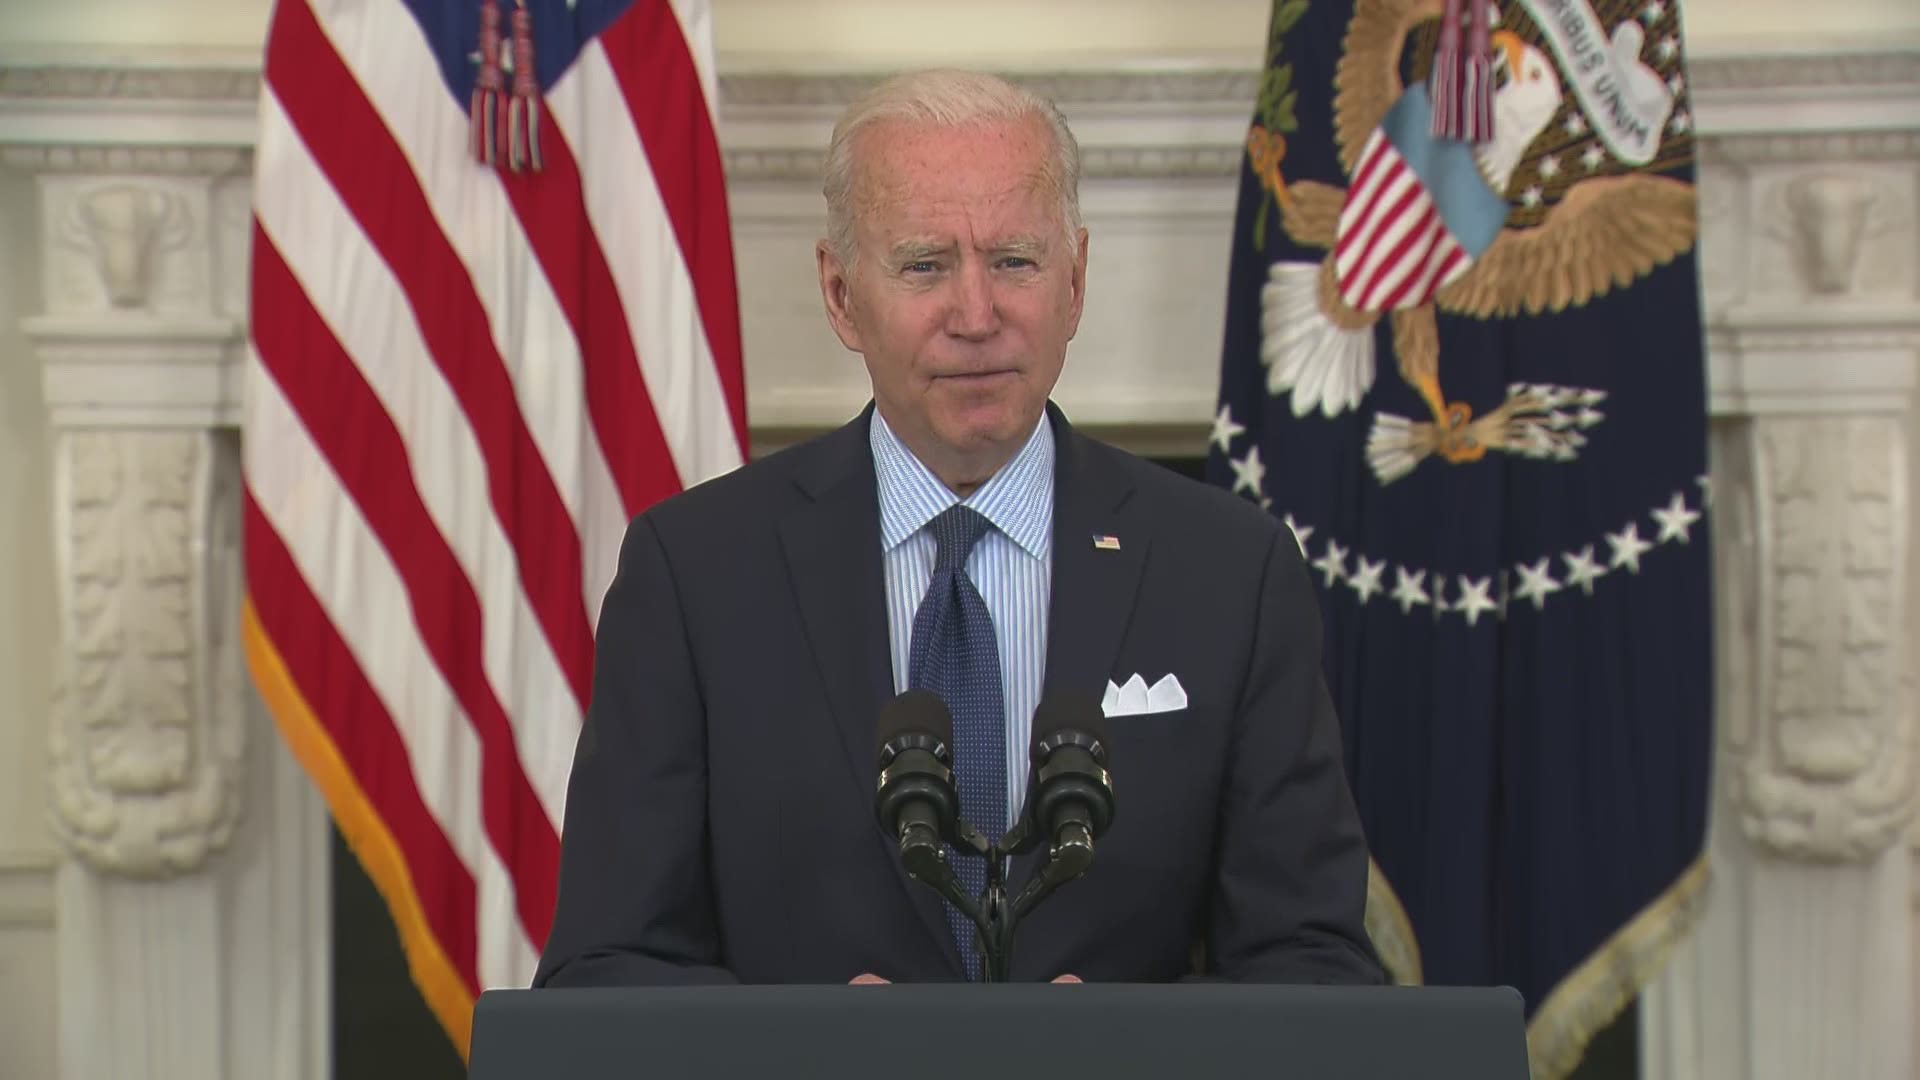 President Joe Biden said Tuesday that if and when the FDA approves COVID vaccines for kids, there will be pharmacy sites ready as soon as the okay is given.